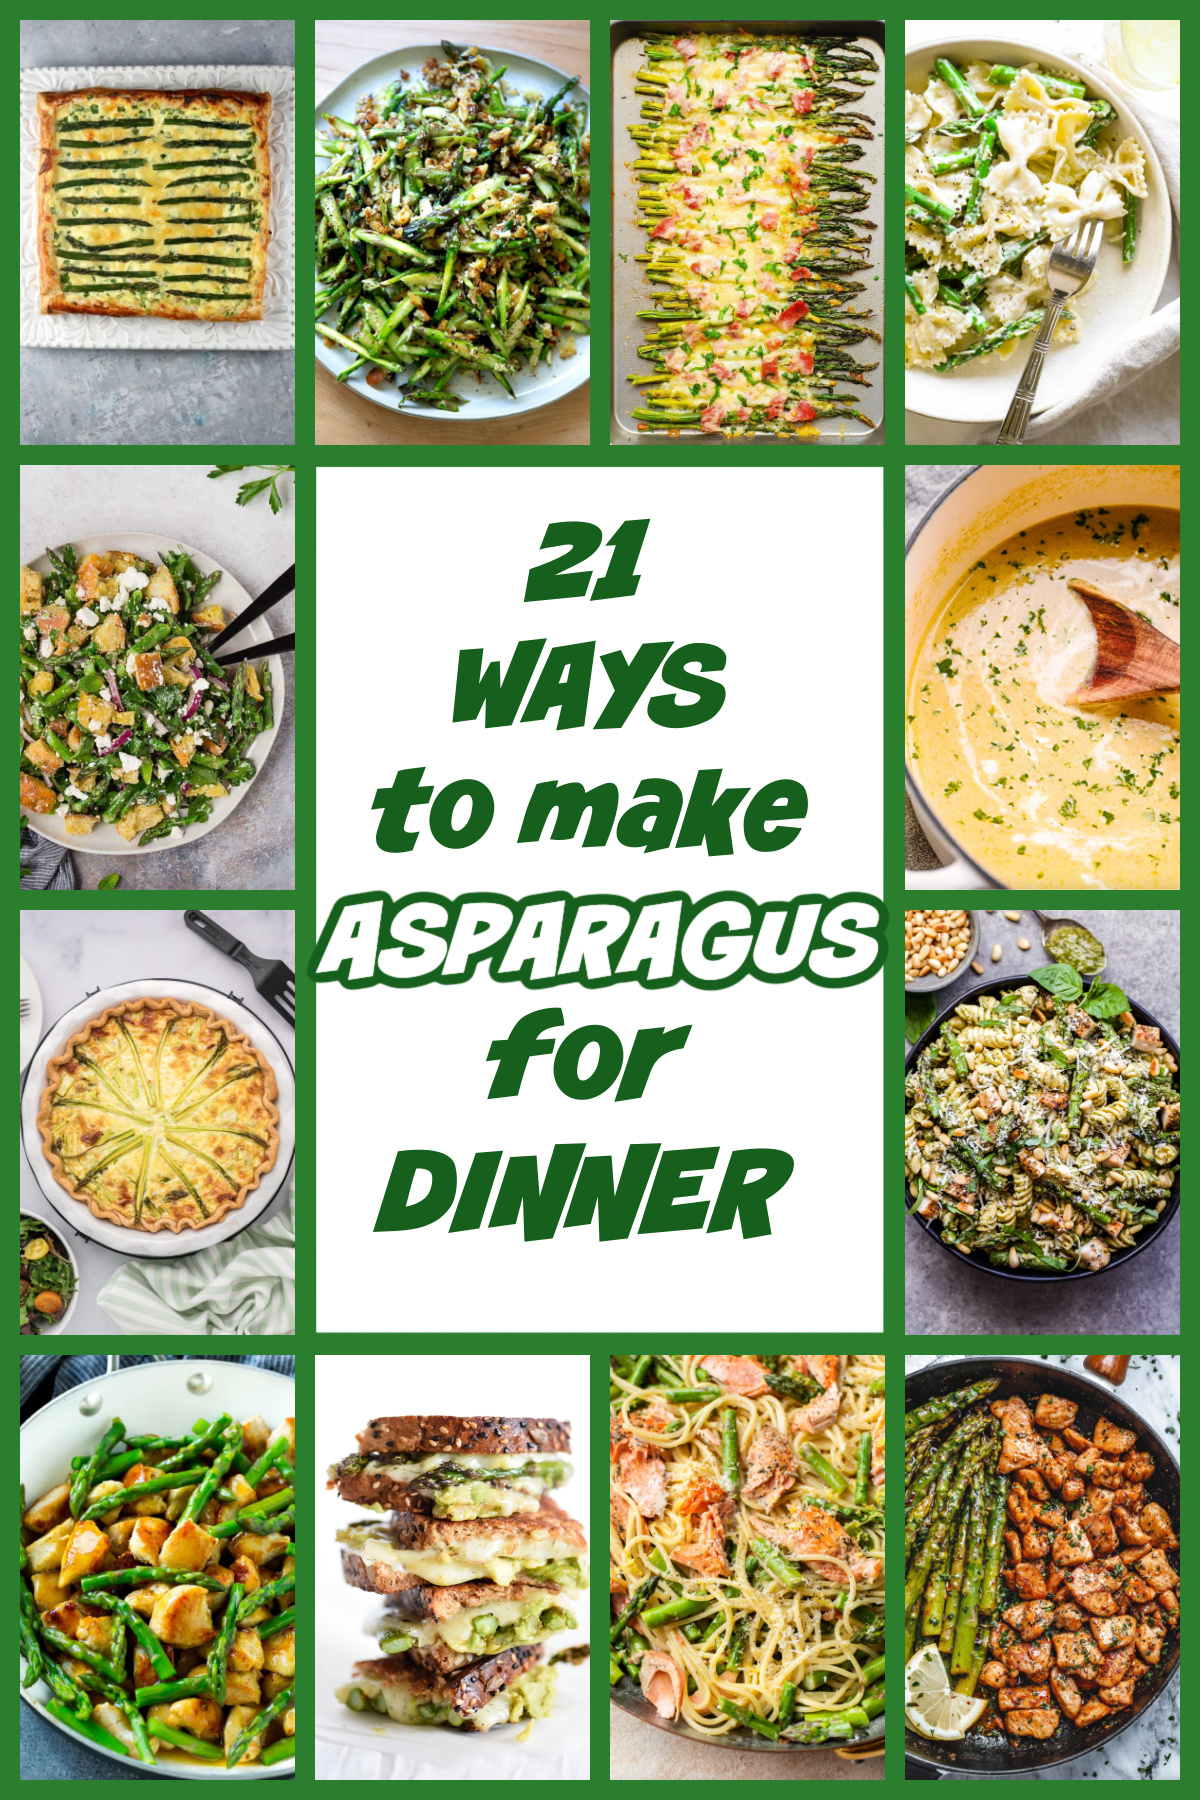 collage of asparagus dinner recipes